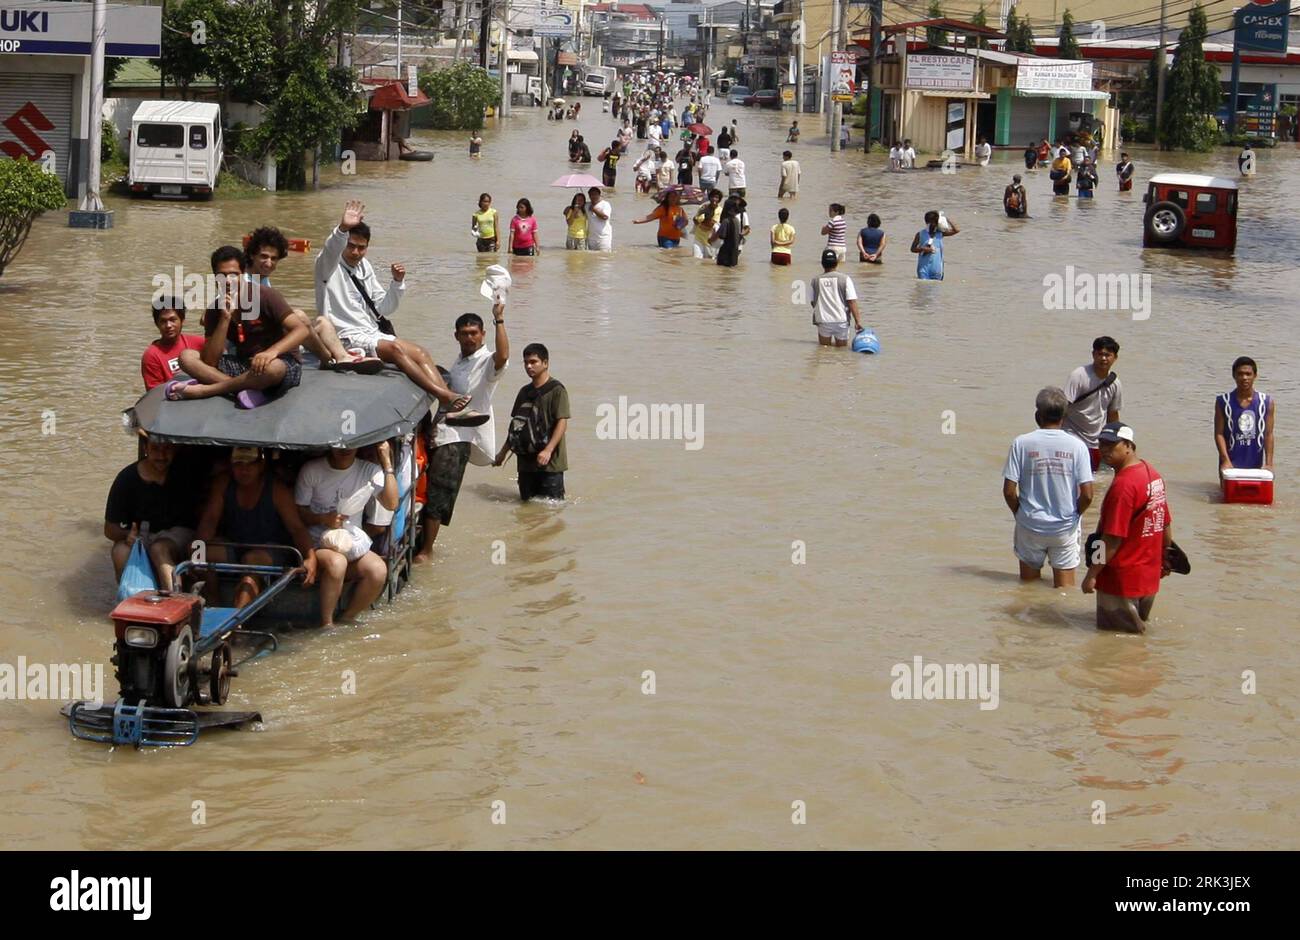 Bildnummer: 53522541  Datum: 10.10.2009  Copyright: imago/Xinhua (091010) -- MANILA, Oct. 10, 2009 (Xinhua) -- Filipinos wade in flooded street of Dagupan town, Pangasinan province, northern Philippines on 10 October 2009. The death toll in landslides and floods that hit the northern Philippines in the wake of typhoon Parma reached 299 as rescuers struggled through mud and raging waters in search of dozens of still missing, officials said. (Xinhua/Sybhel Cordero) (3)PHILIPPINES-MANILA-FLOOD PUBLICATIONxNOTxINxCHN Naturkatastrophen Überschwemmung Taifun Parma kbdig xsk 2009 quer o0 Straße Perso Stock Photo